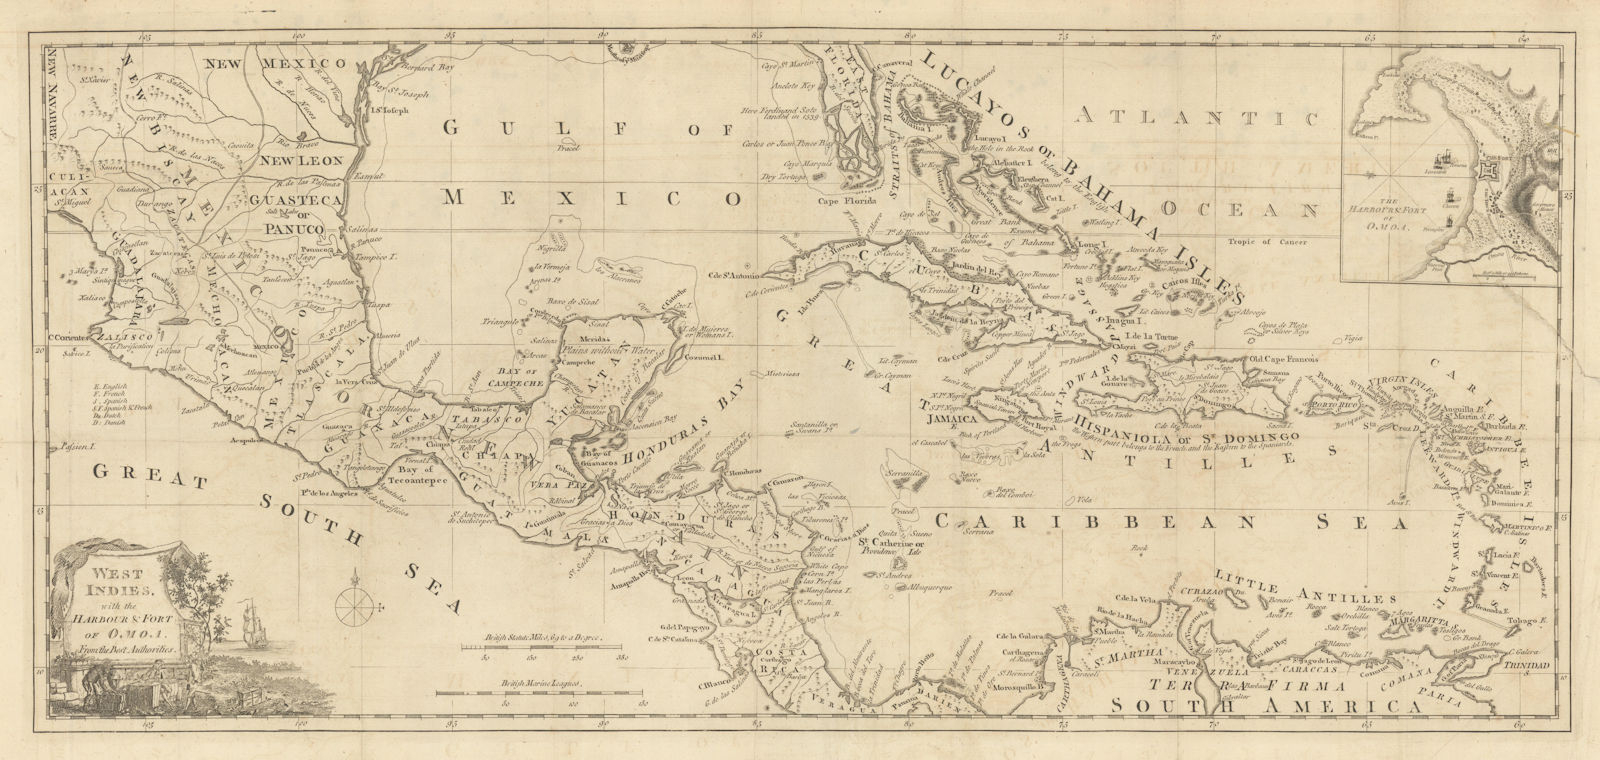 West Indies with the Harbour & Fort of Omoa from the best… JOHN LODGE 1780 map